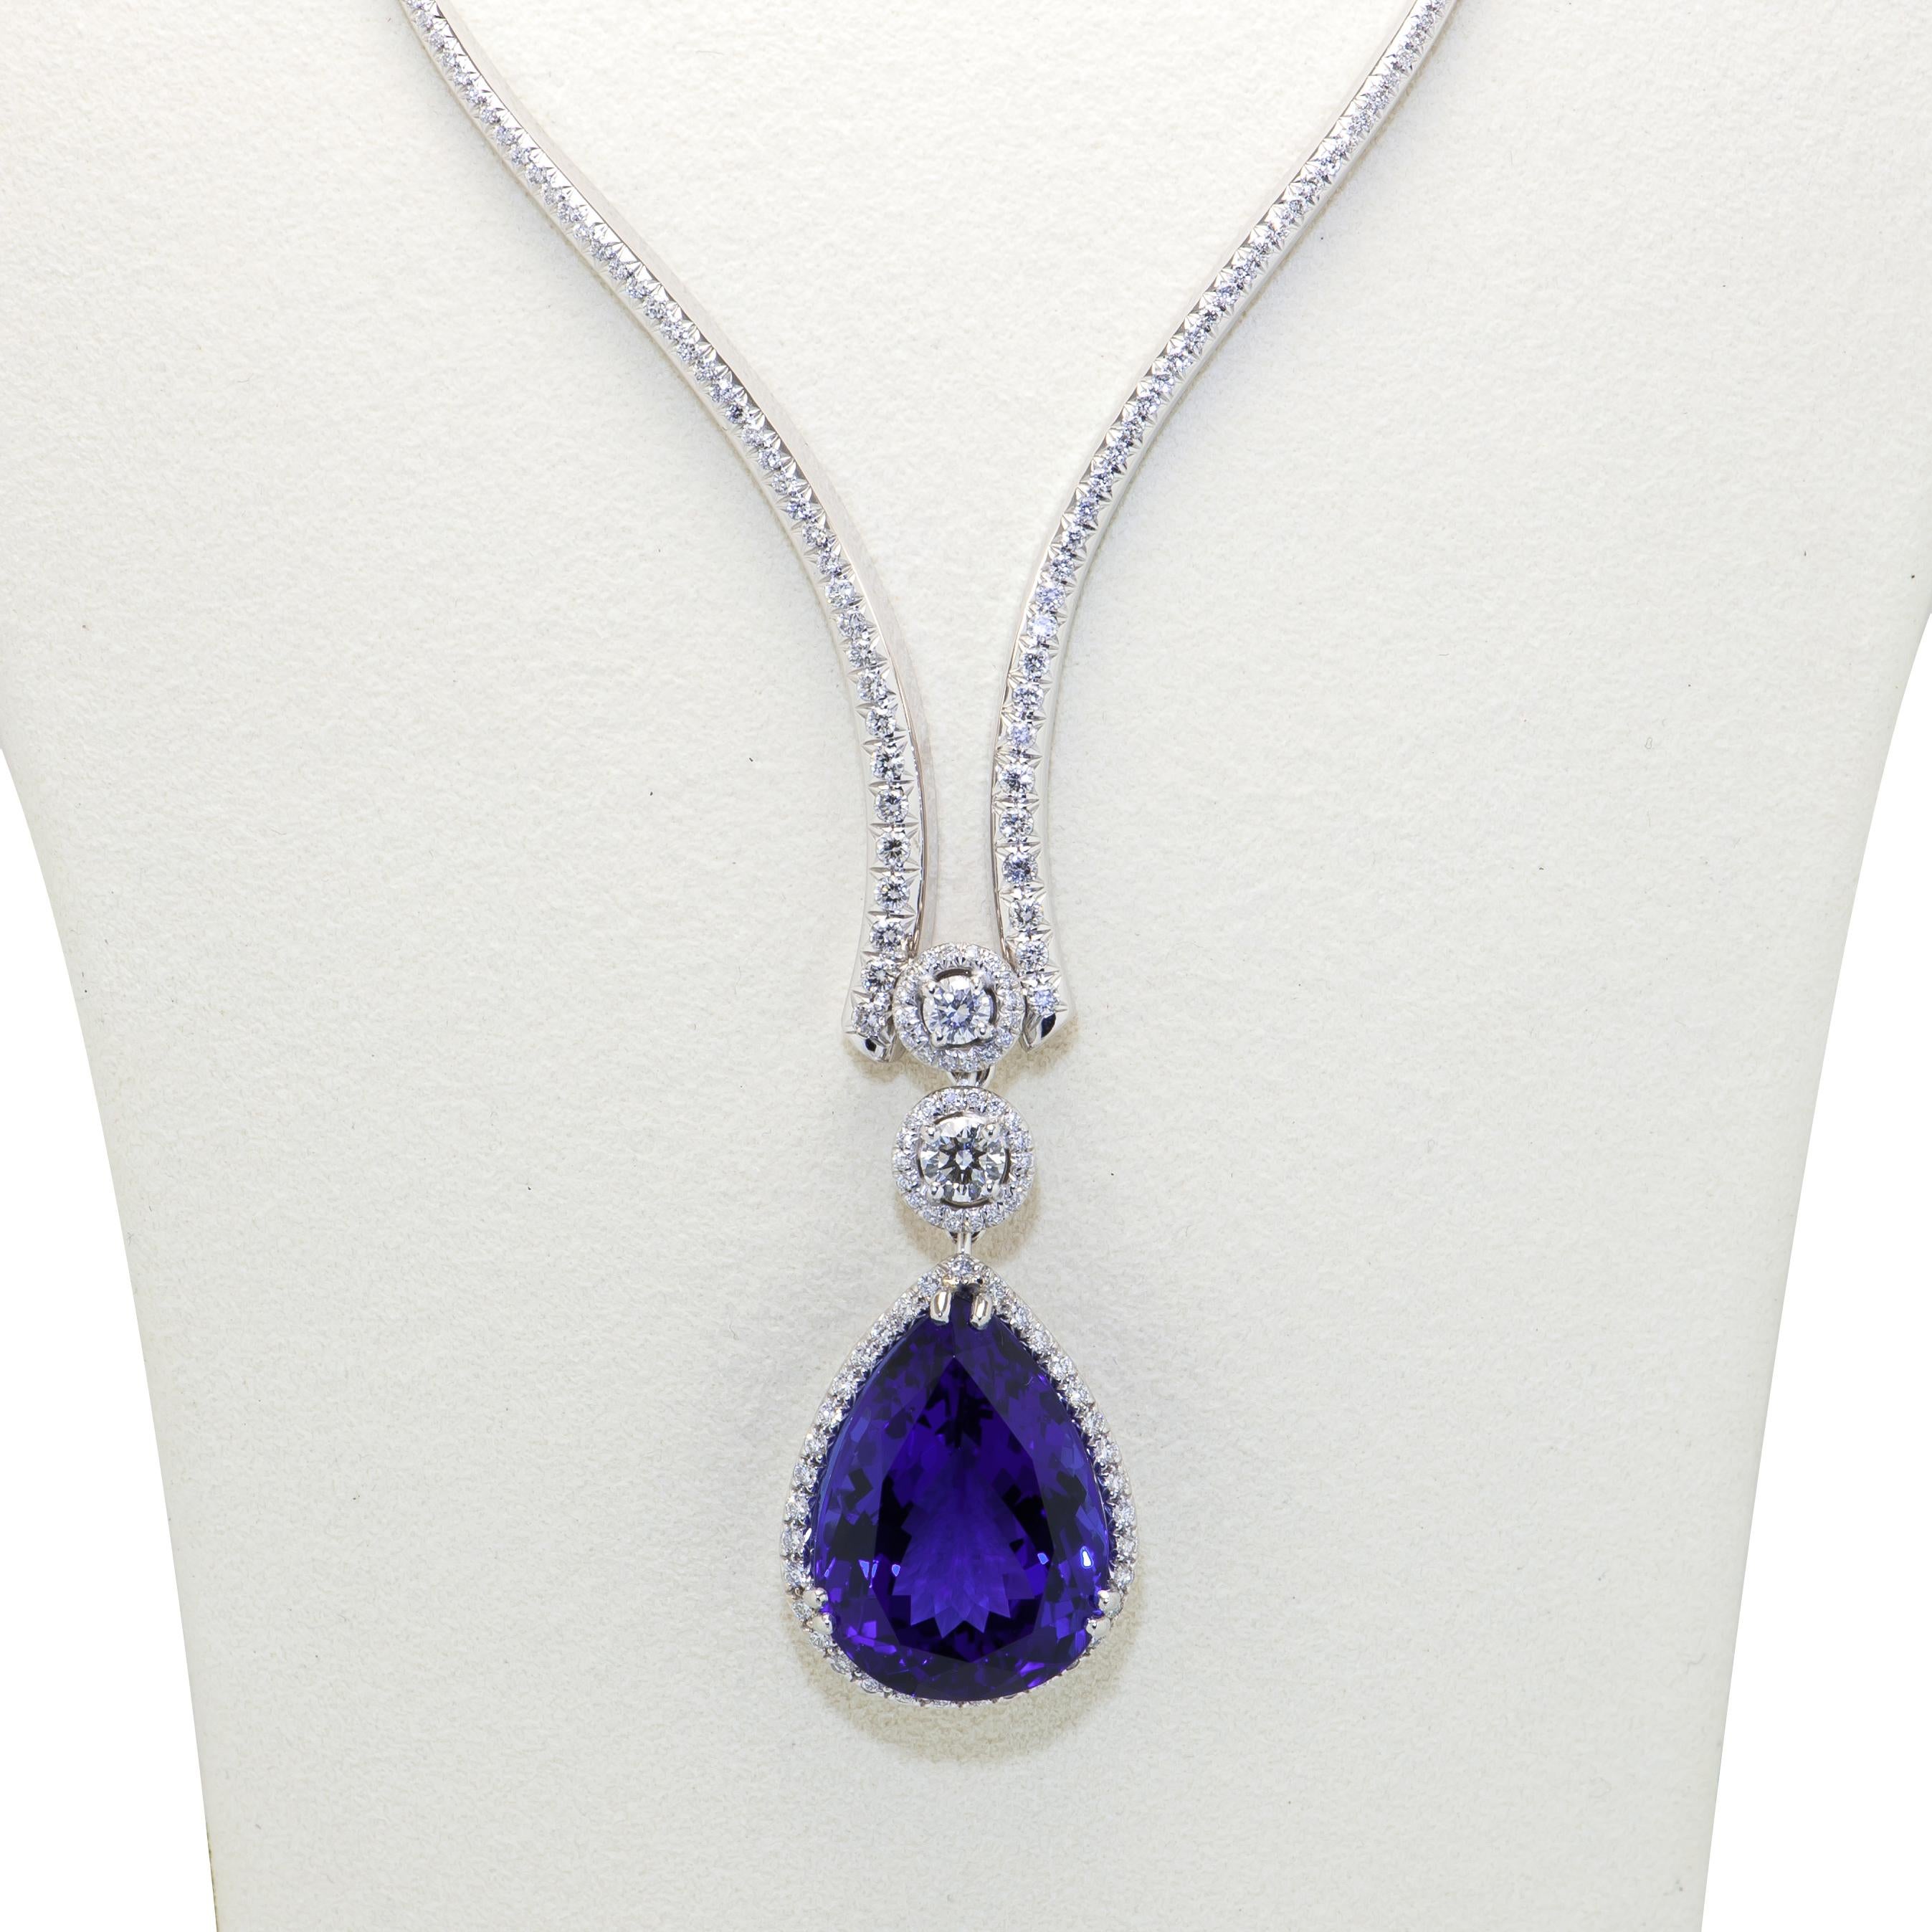 Simply Beautiful Diamond Necklace hand set with 189 Brilliant cut Diamonds, 3.53 tcw and featuring a Spectacular 31 Carat Pear shaped Tanzanite Drop Pendant, measuring 17x24x11mm surrounded by 35 Brilliant cut Diamonds, approx. 0.46tcw. Approx. 25”